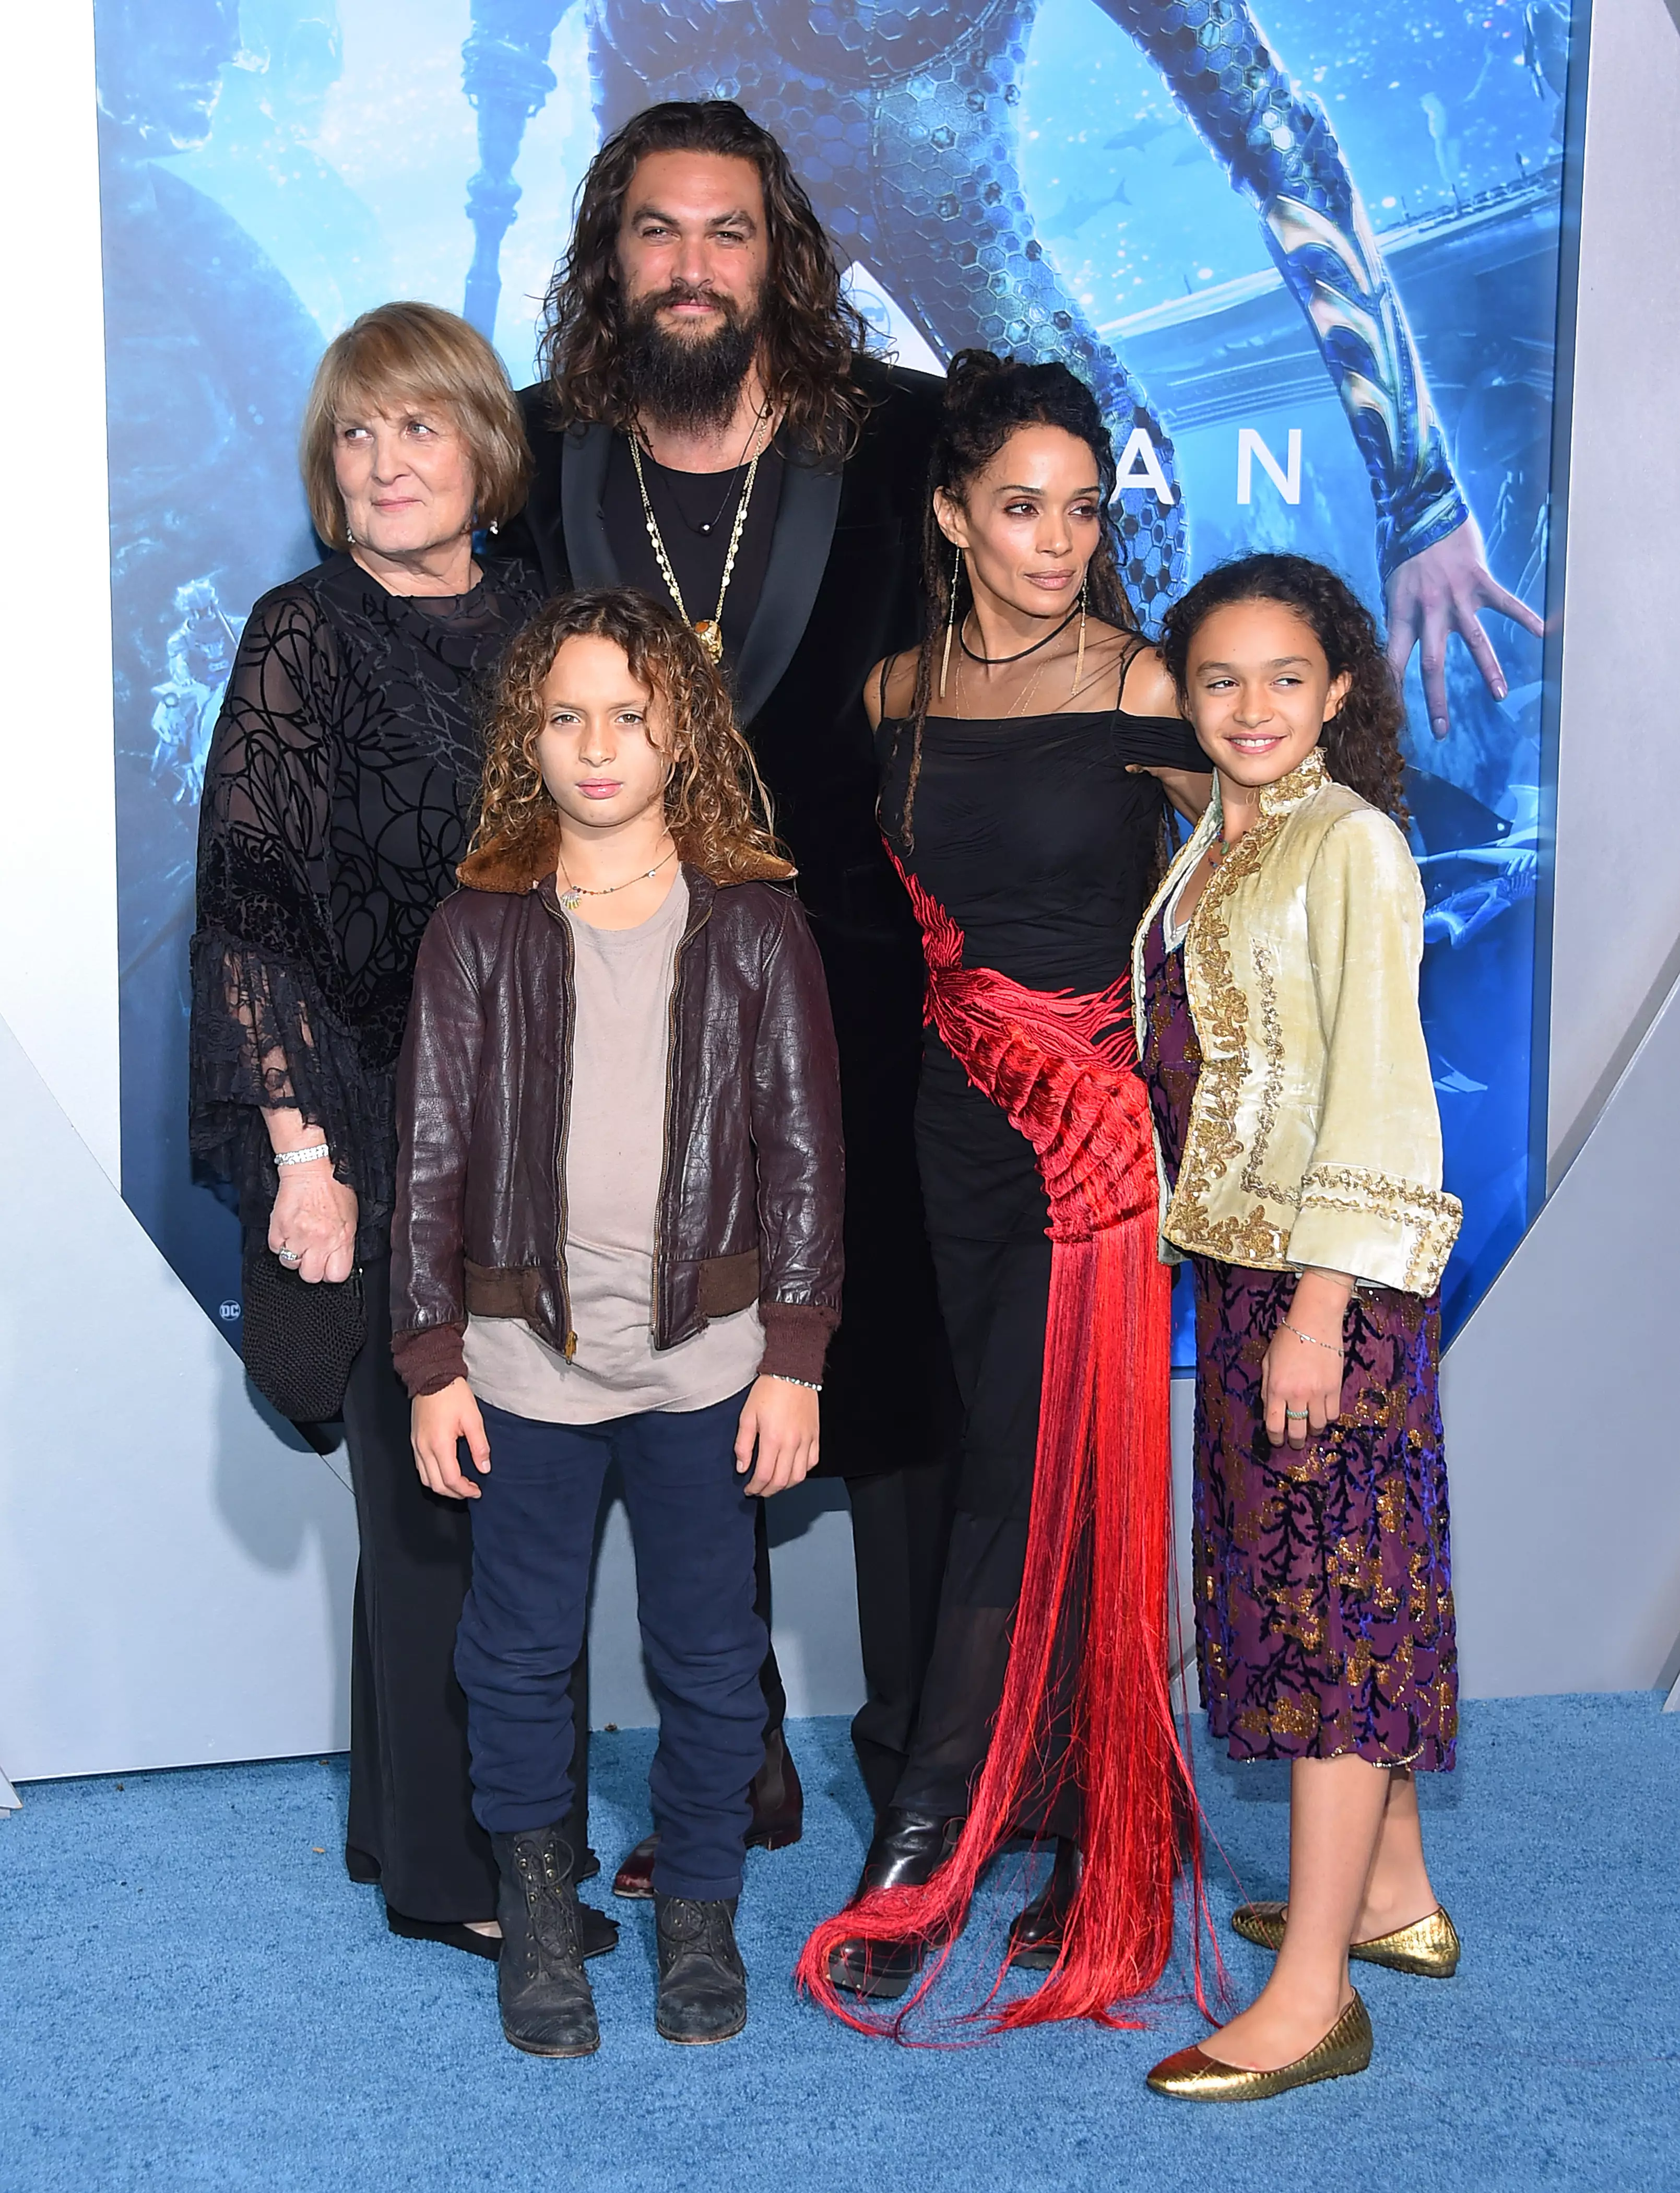 The actor has two children Lola, 14, and Nokoa-Wolf, 12, with his wife Lisa Bonet. (